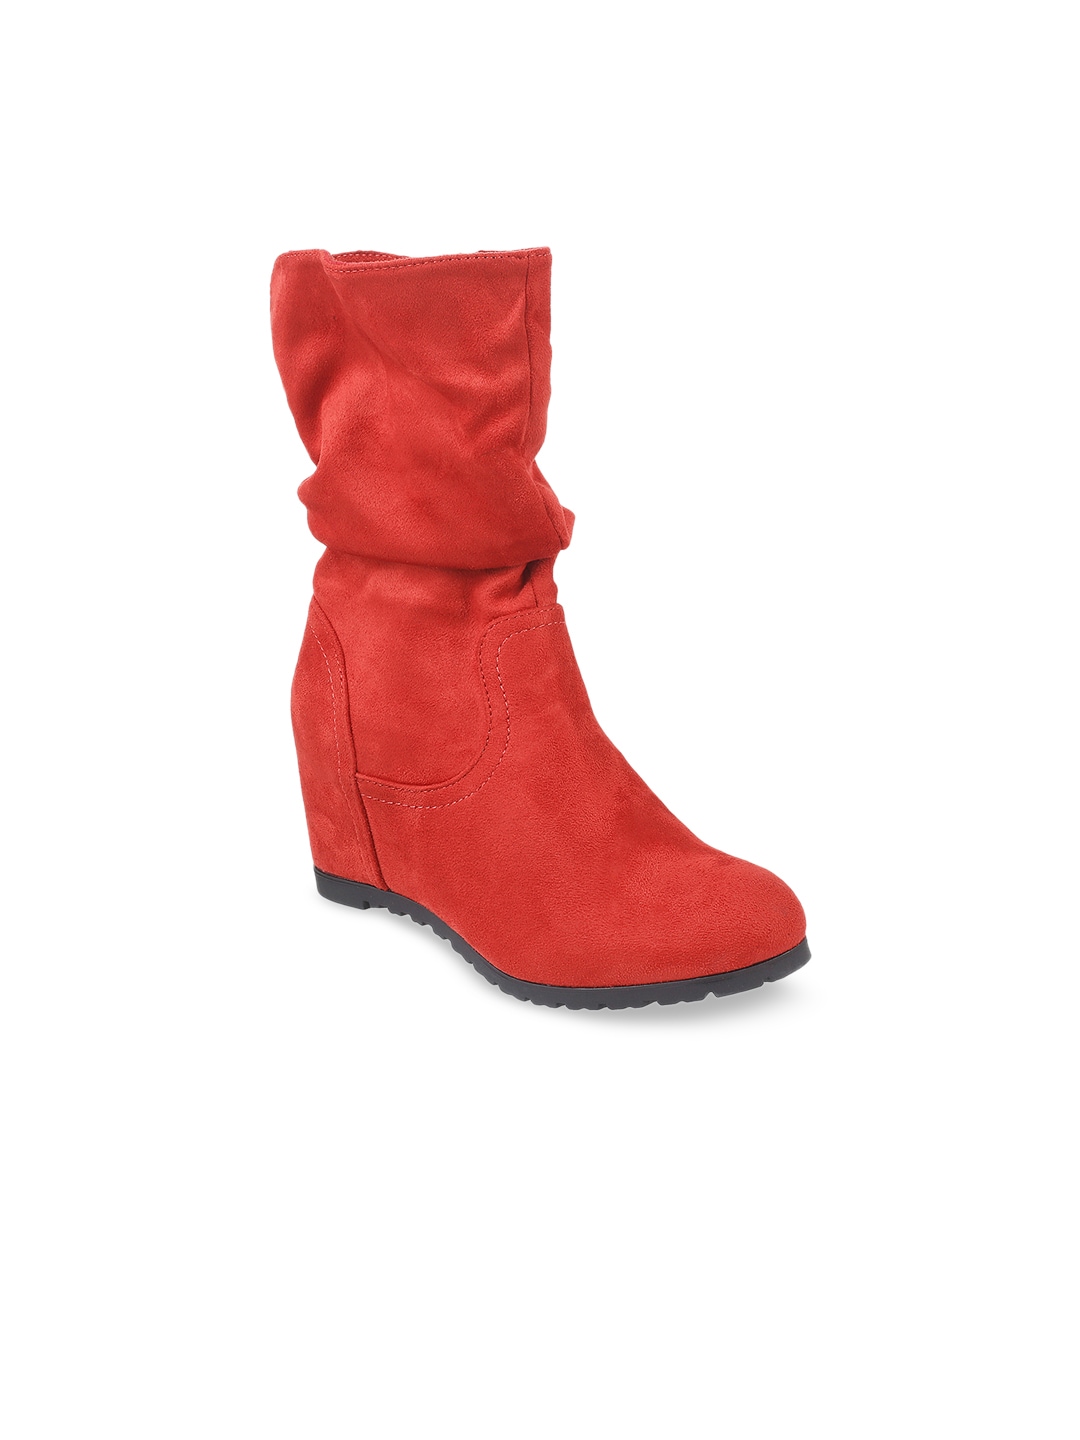 Metro Women Red Solid Heeled Boots Price in India